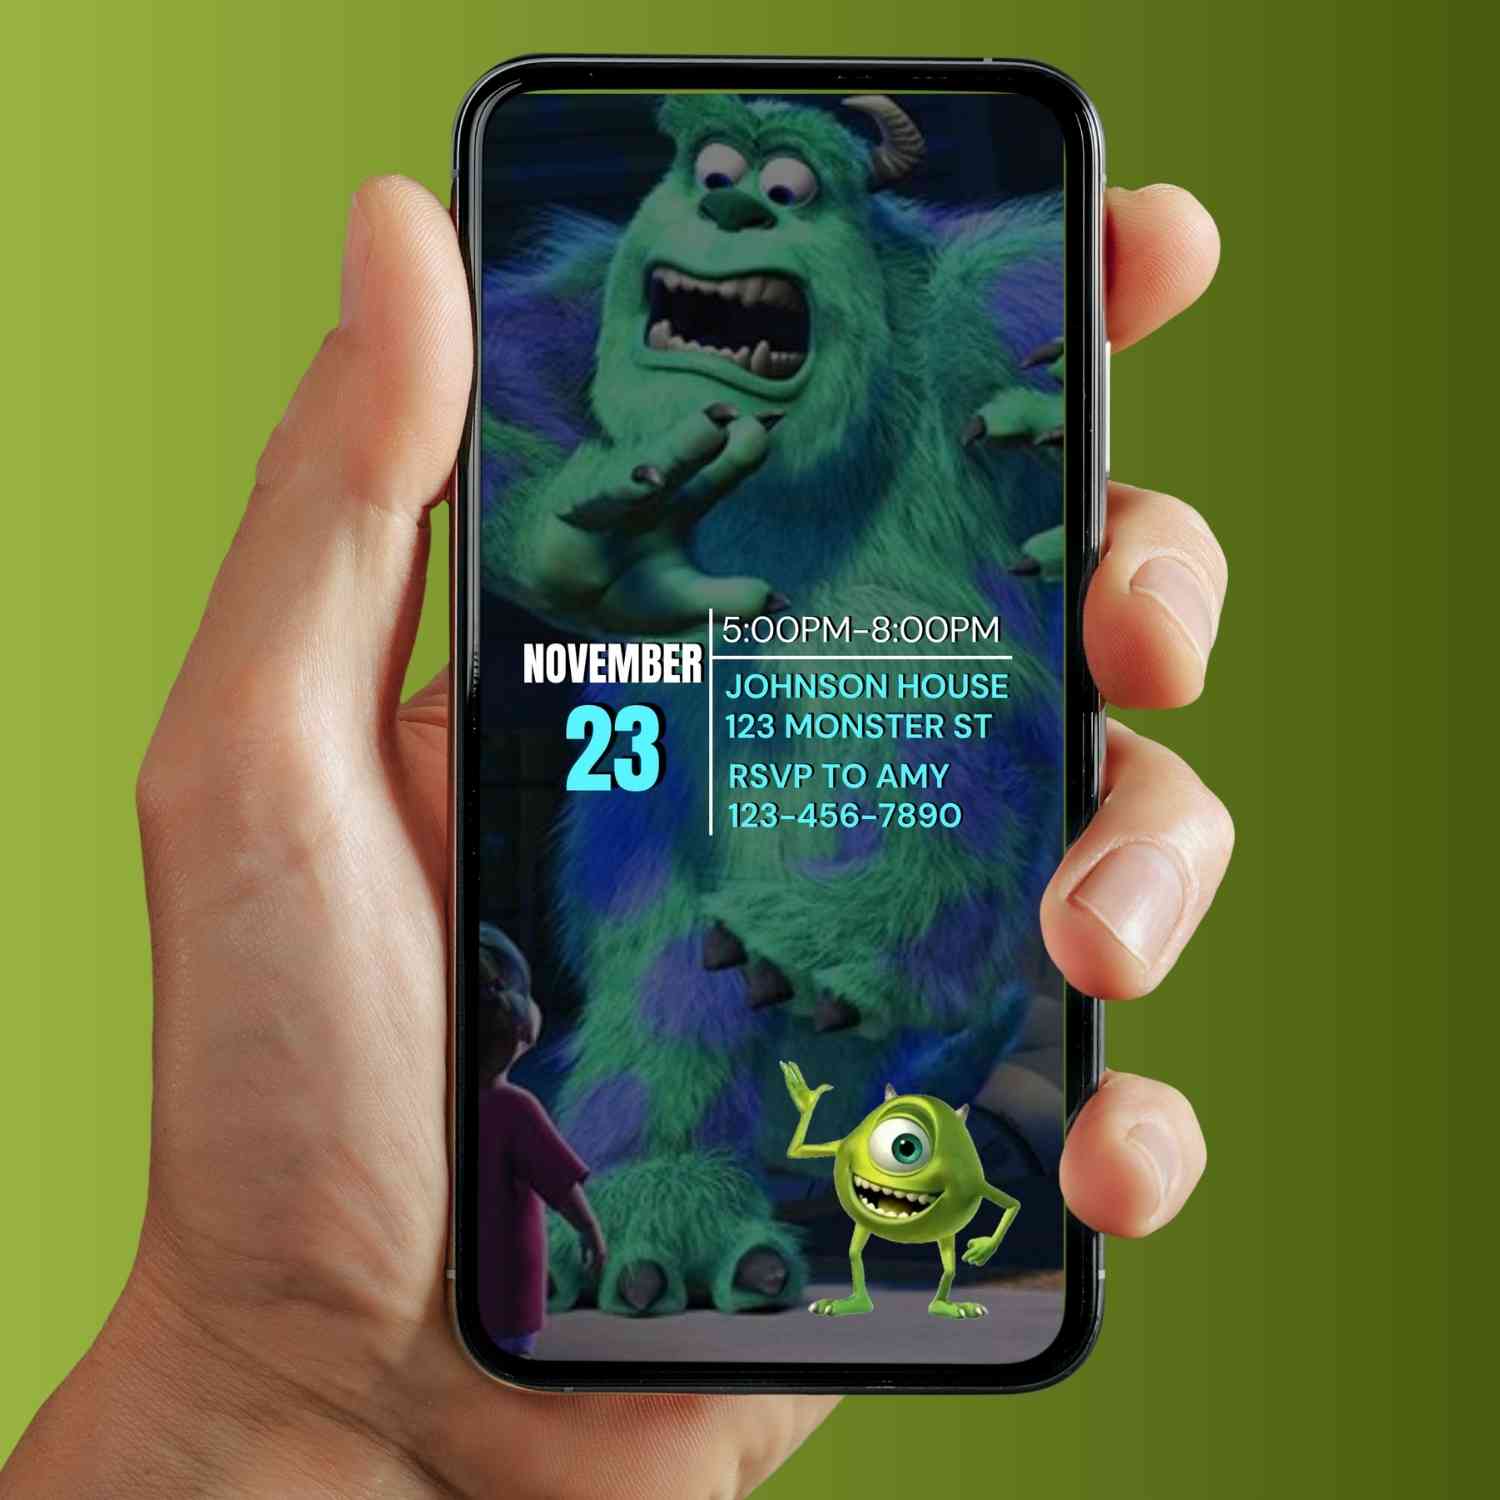 Monsters Inc Animated Birthday Video Invitation | Personalized and Fun